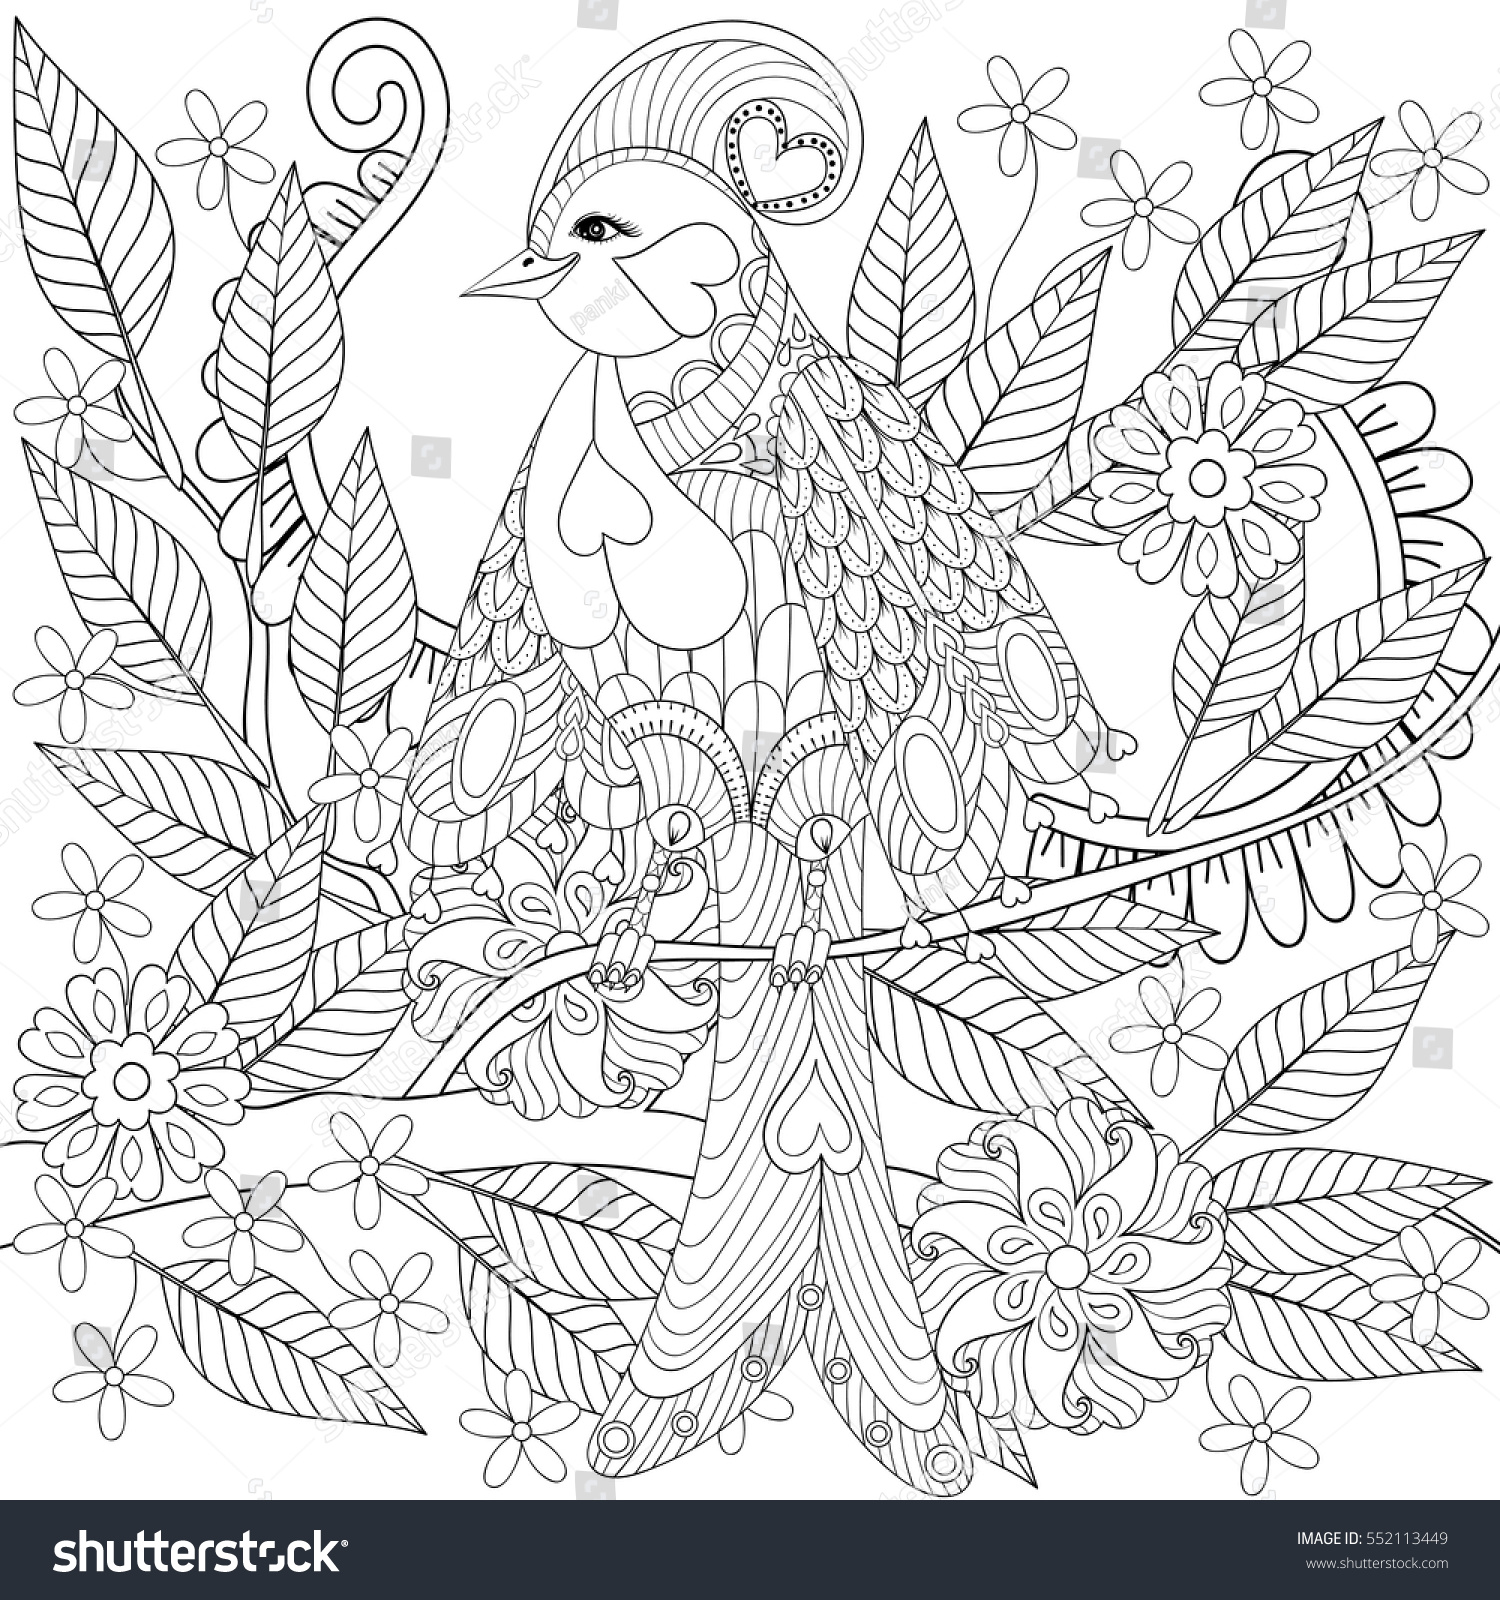 stock-vector-exotic-tropical-zentangle-bird-sitting-on-branch-with-flowers-for-adult-anti-stress-coloring-page-552113449